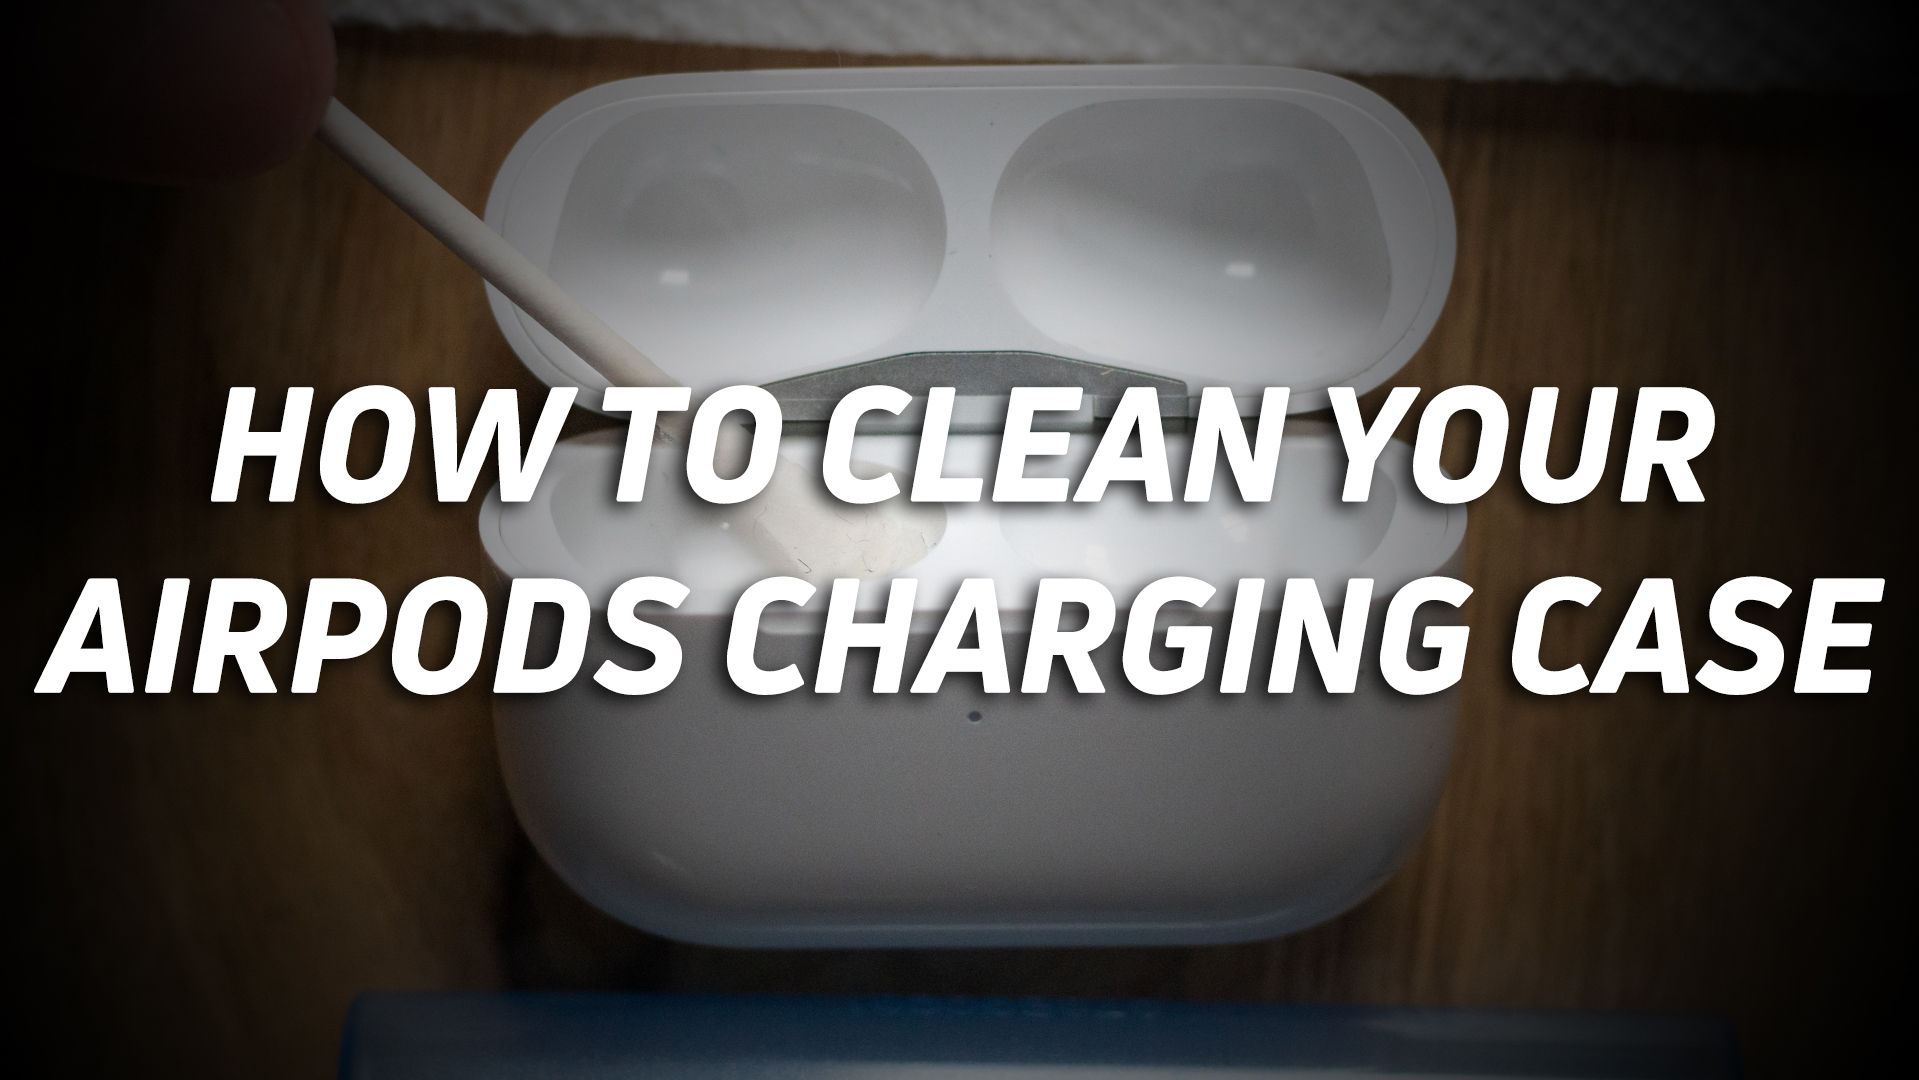 A photo of an Apple AirPods charging case getting cleaned, with the text "how to clean your AirPods charging case" overlaid.